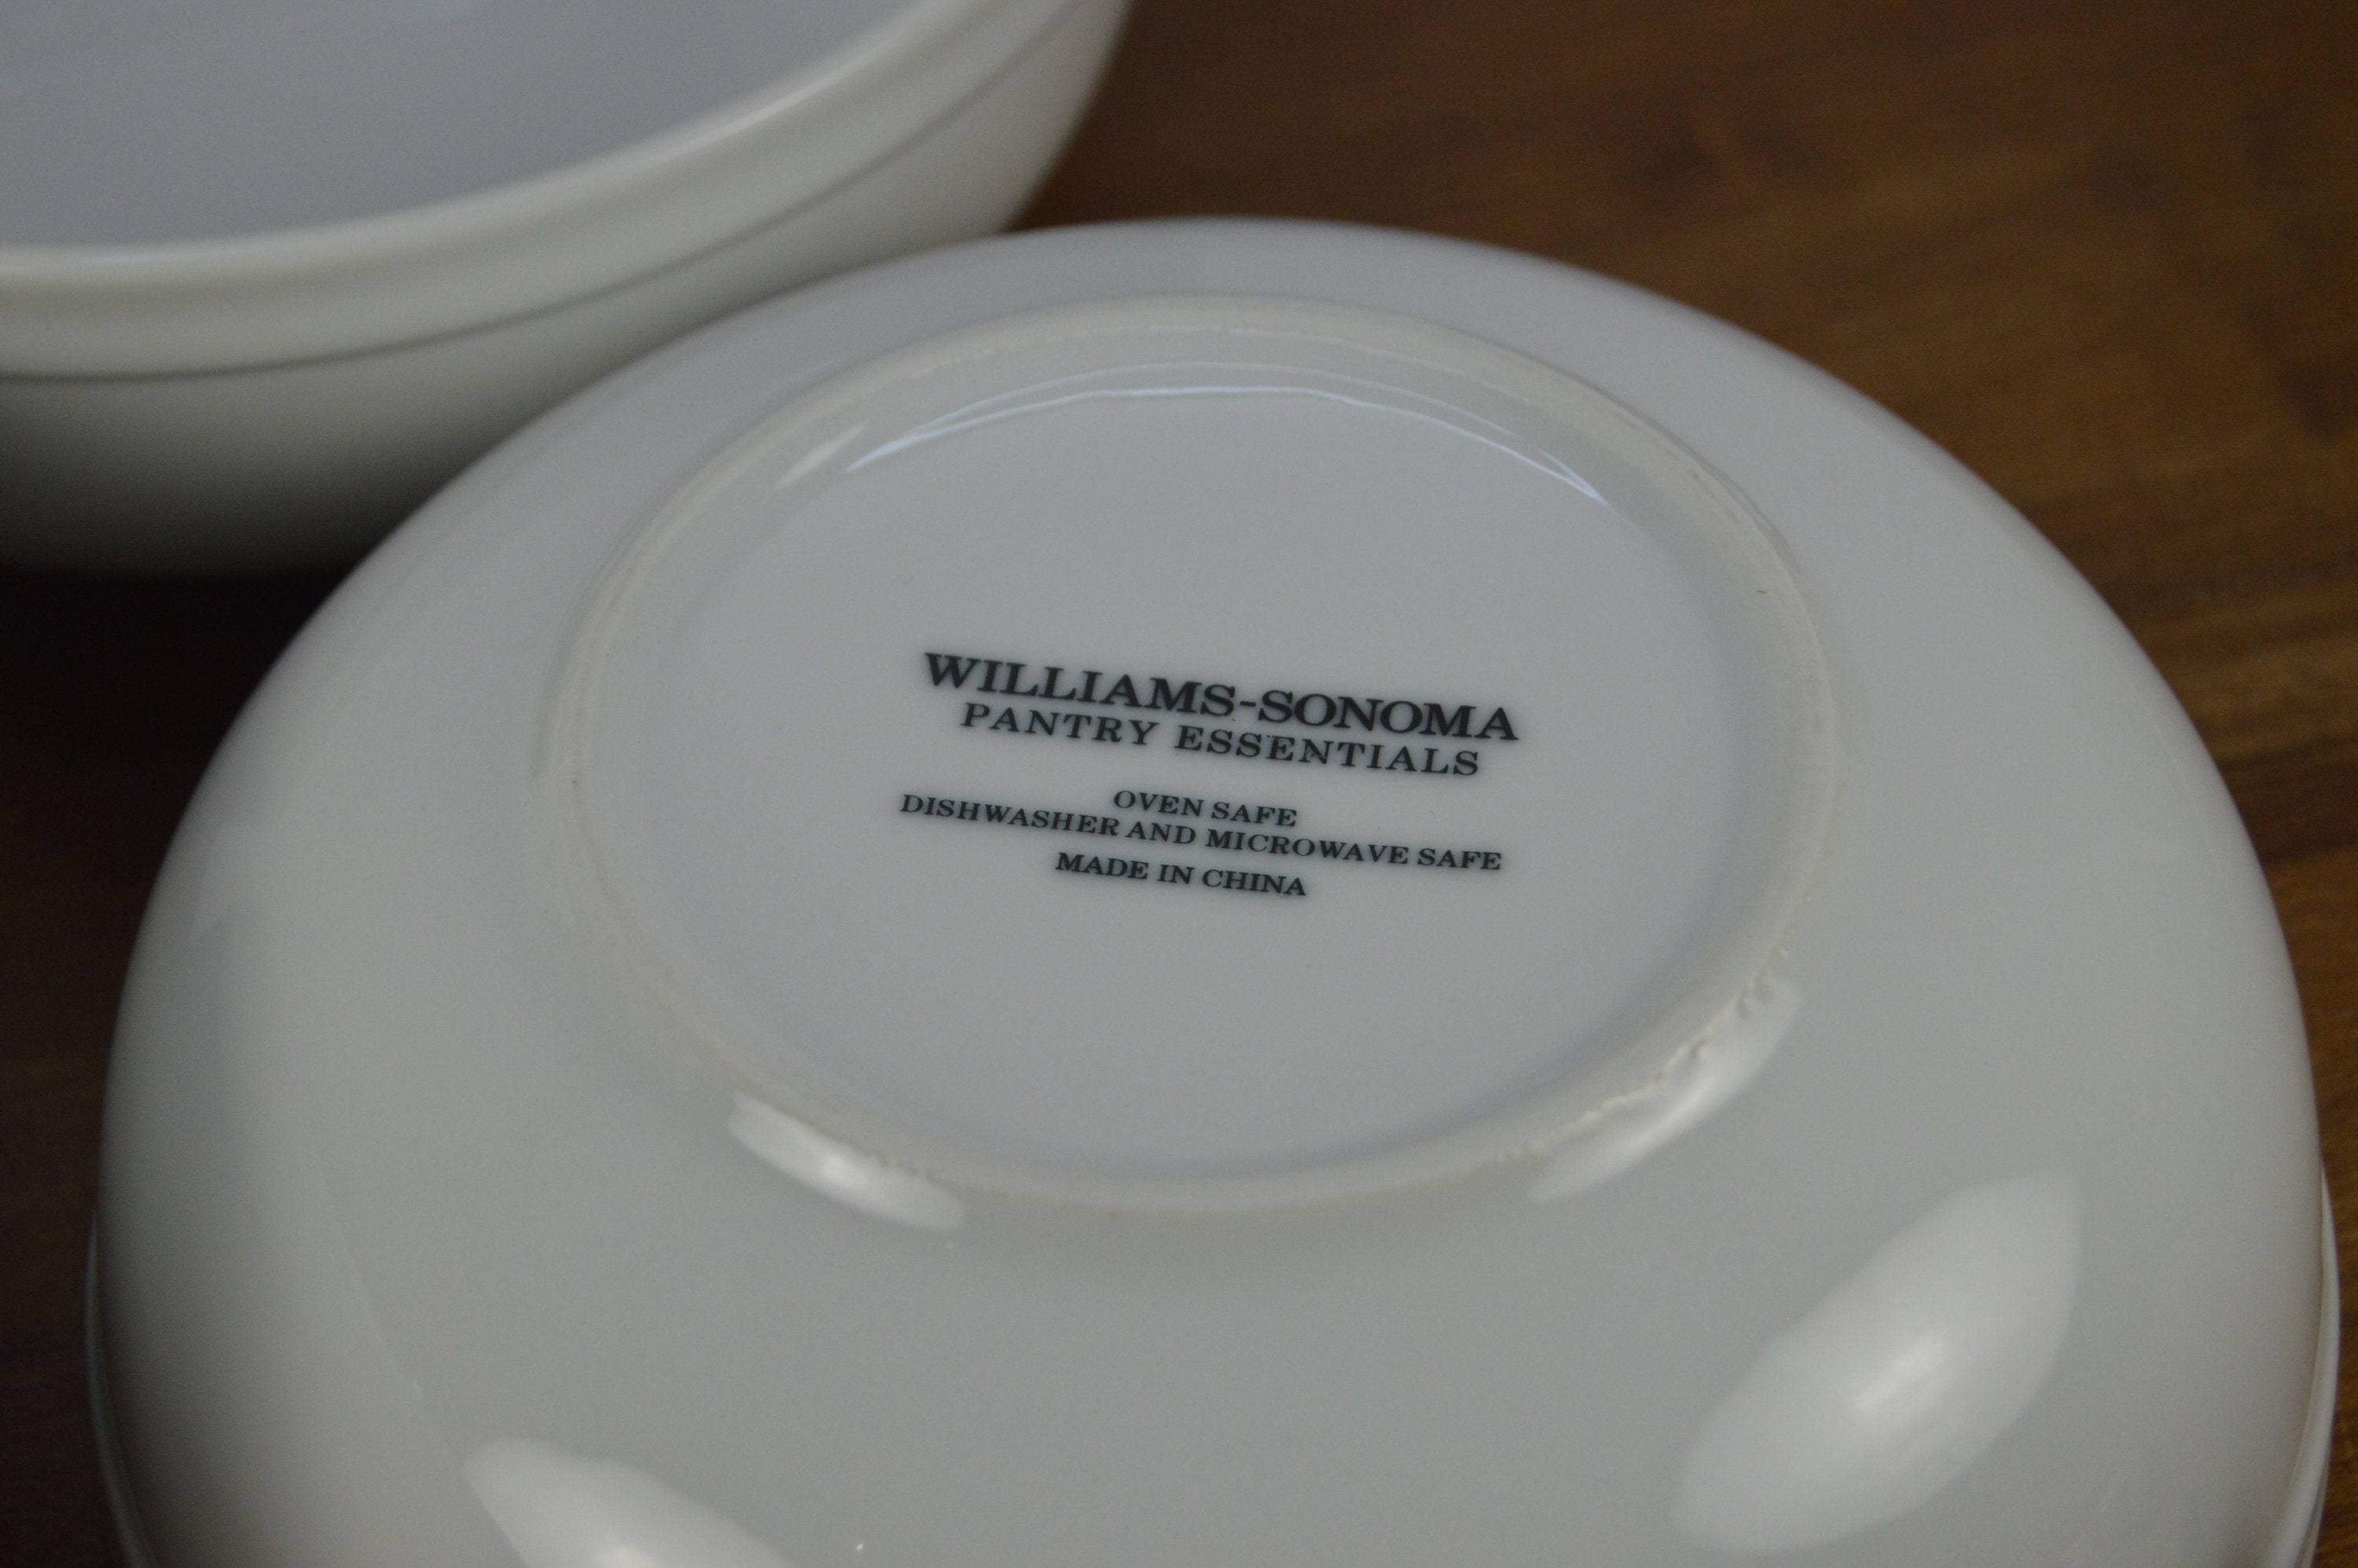 Set of 4 Williams-sonoma PANTRY ESSENTIALS 6.25 Cereal Soup Bowls, All  White, Raised Edge 